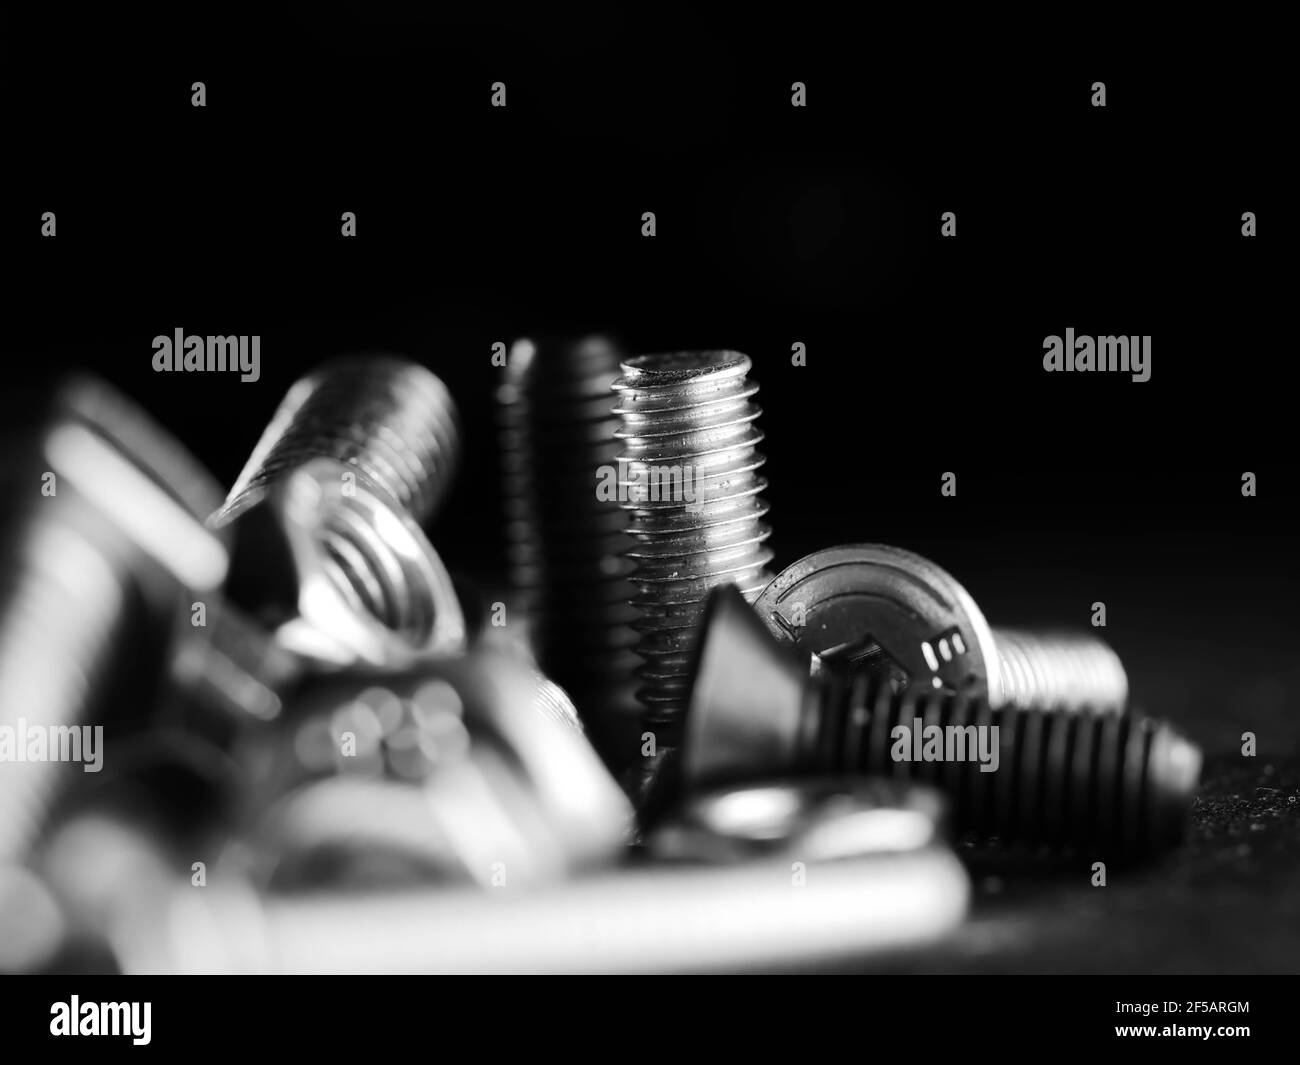 Close-up of various steel nuts and bolts Stock Photo